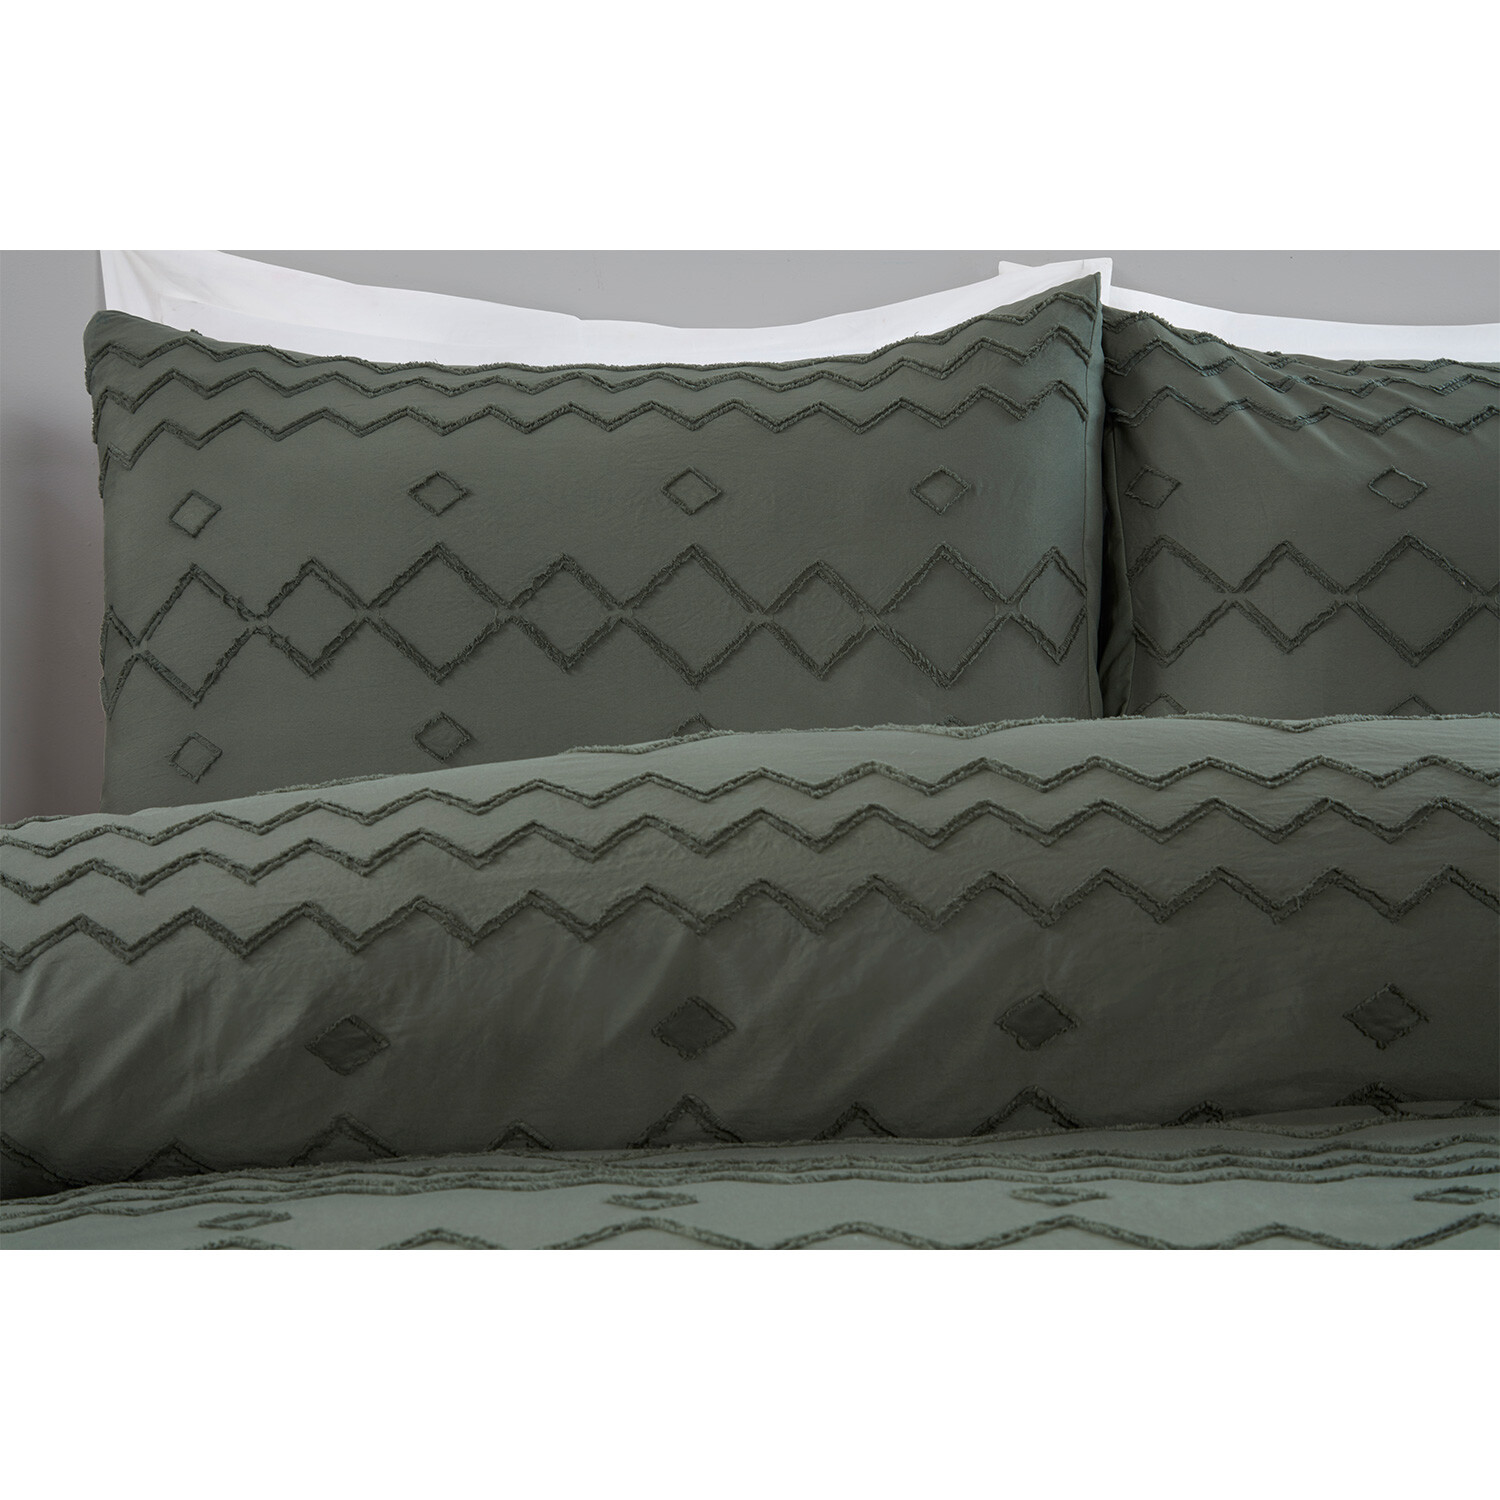 Adah Tufted Geo Duvet Cover and Pillowcase Set - Charcoal / King Image 2